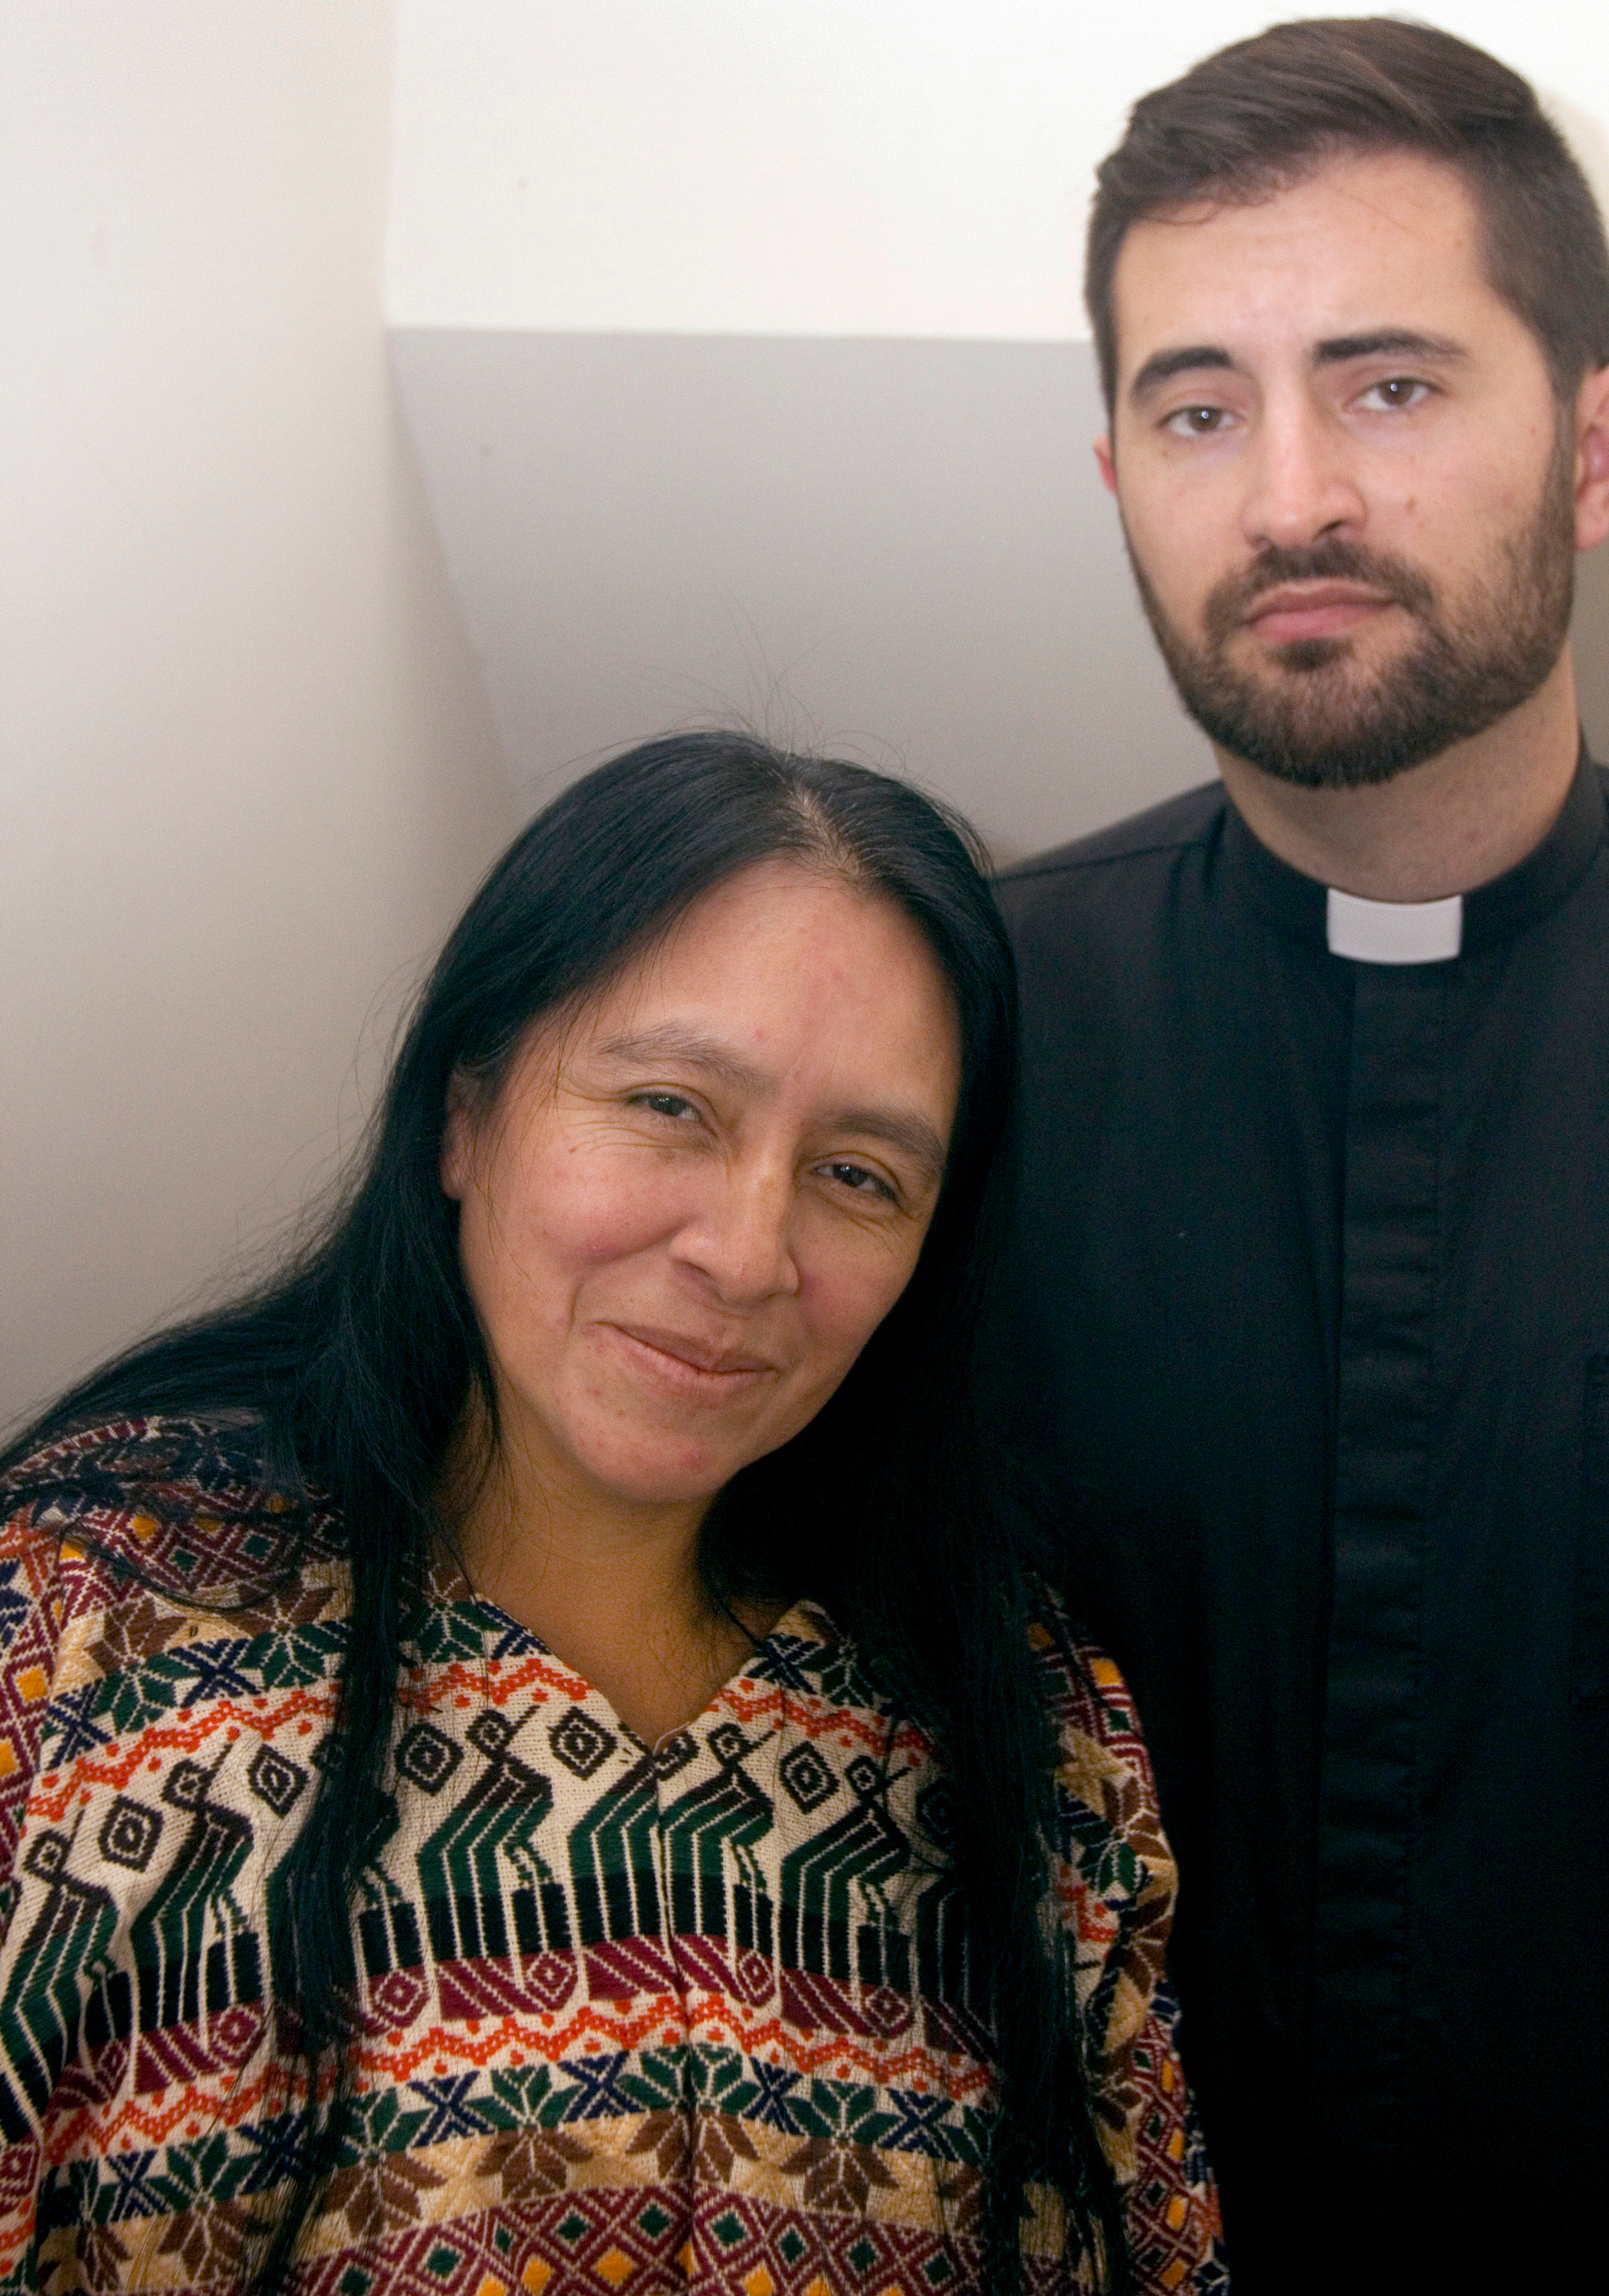 Maria Chavalan Sut stands with the Rev. Isaac Collins, pastor of Wesley Memorial United Methodist Church, at a press conference held Oct. 8. Chavalan Sut is living in the church to avoid deportation. Photo: © Richard Lord.